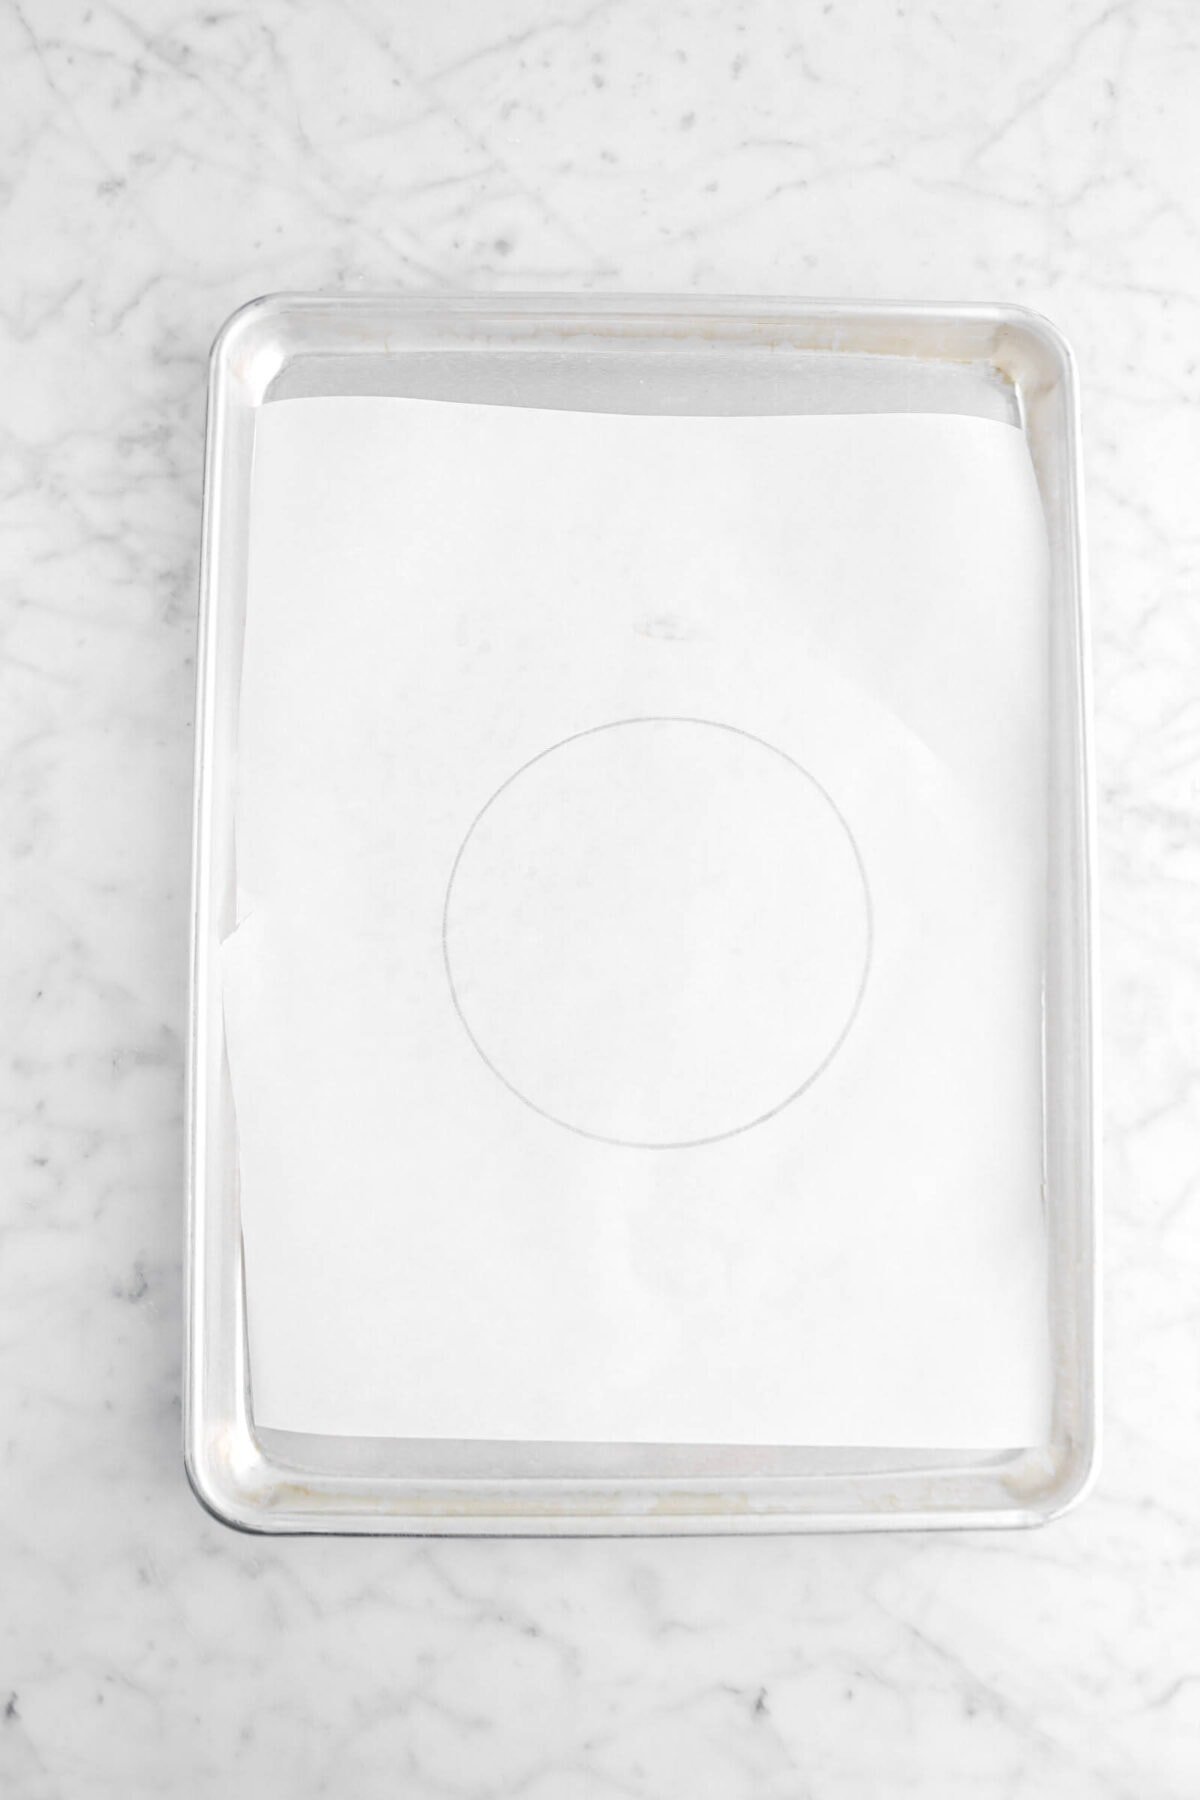 parchment paper with circle drawn on it lining a sheet pan on marle surface